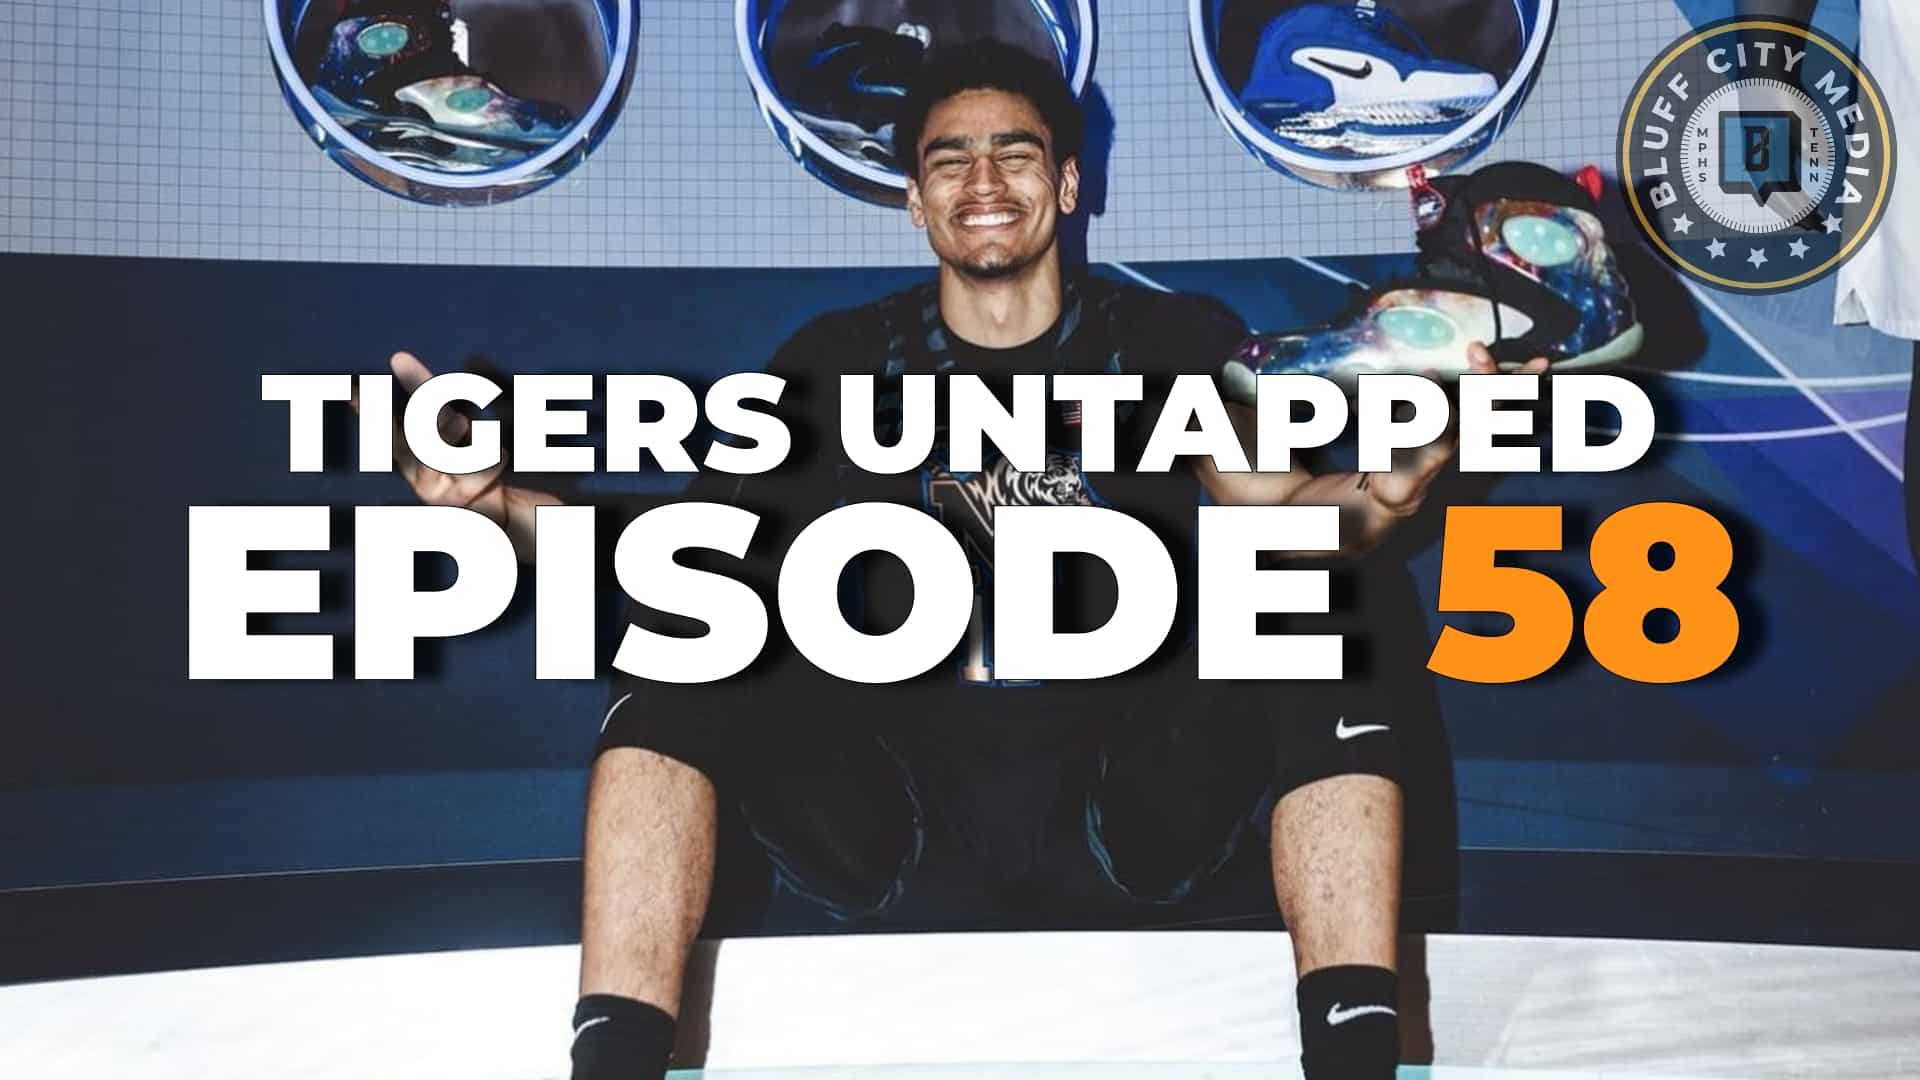 Featured image for “Tigers Untapped Ep 58: Tigers Dominate Wichita State; Nick Jourdain’s Emergence; Memphis Football”